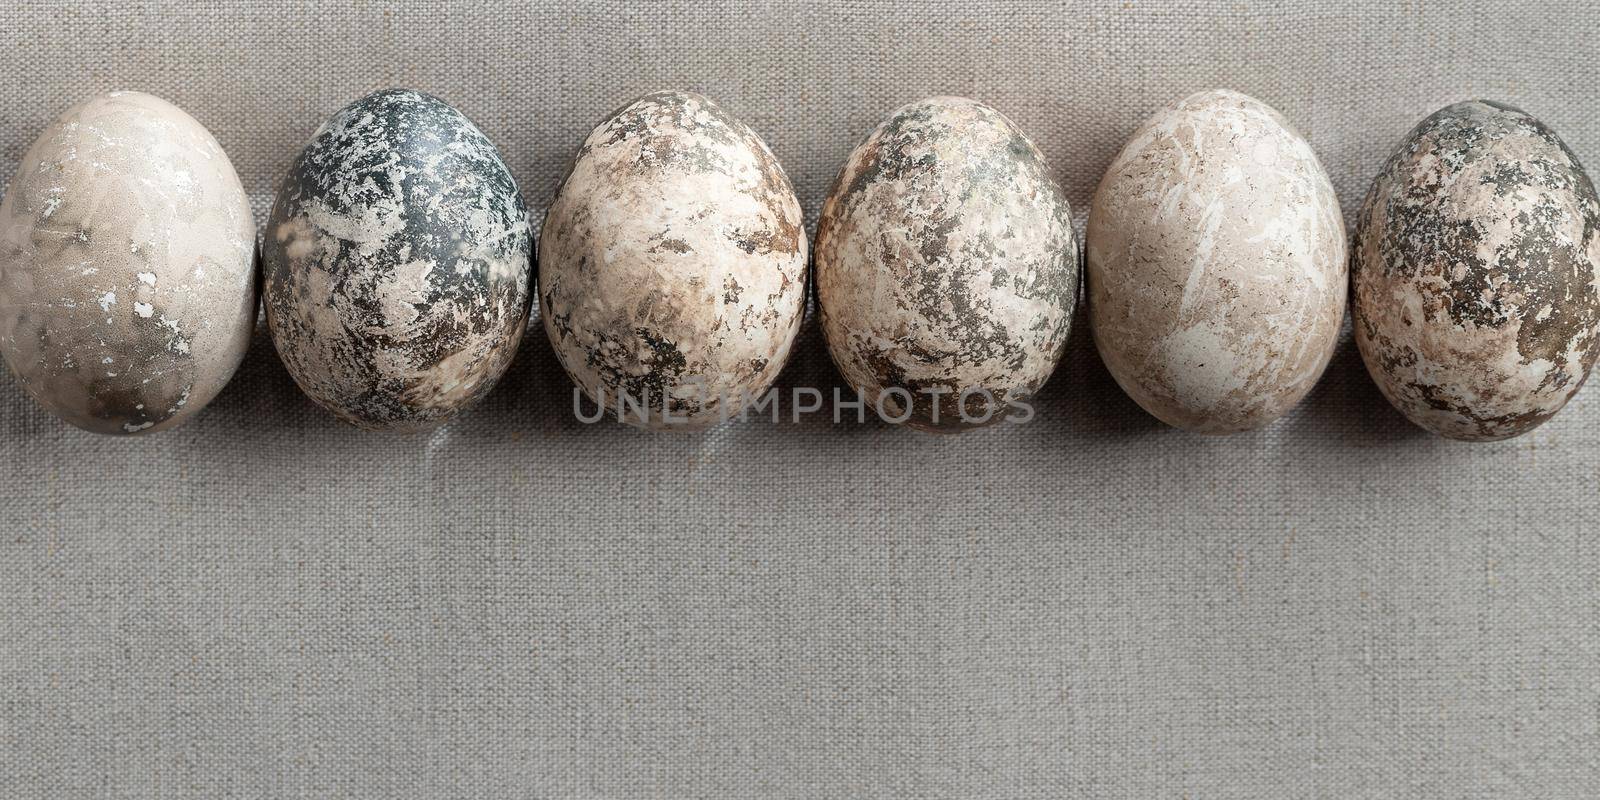 Easter composition - several painted with natural dyes with marble effect on a linen tablecloth in a row.